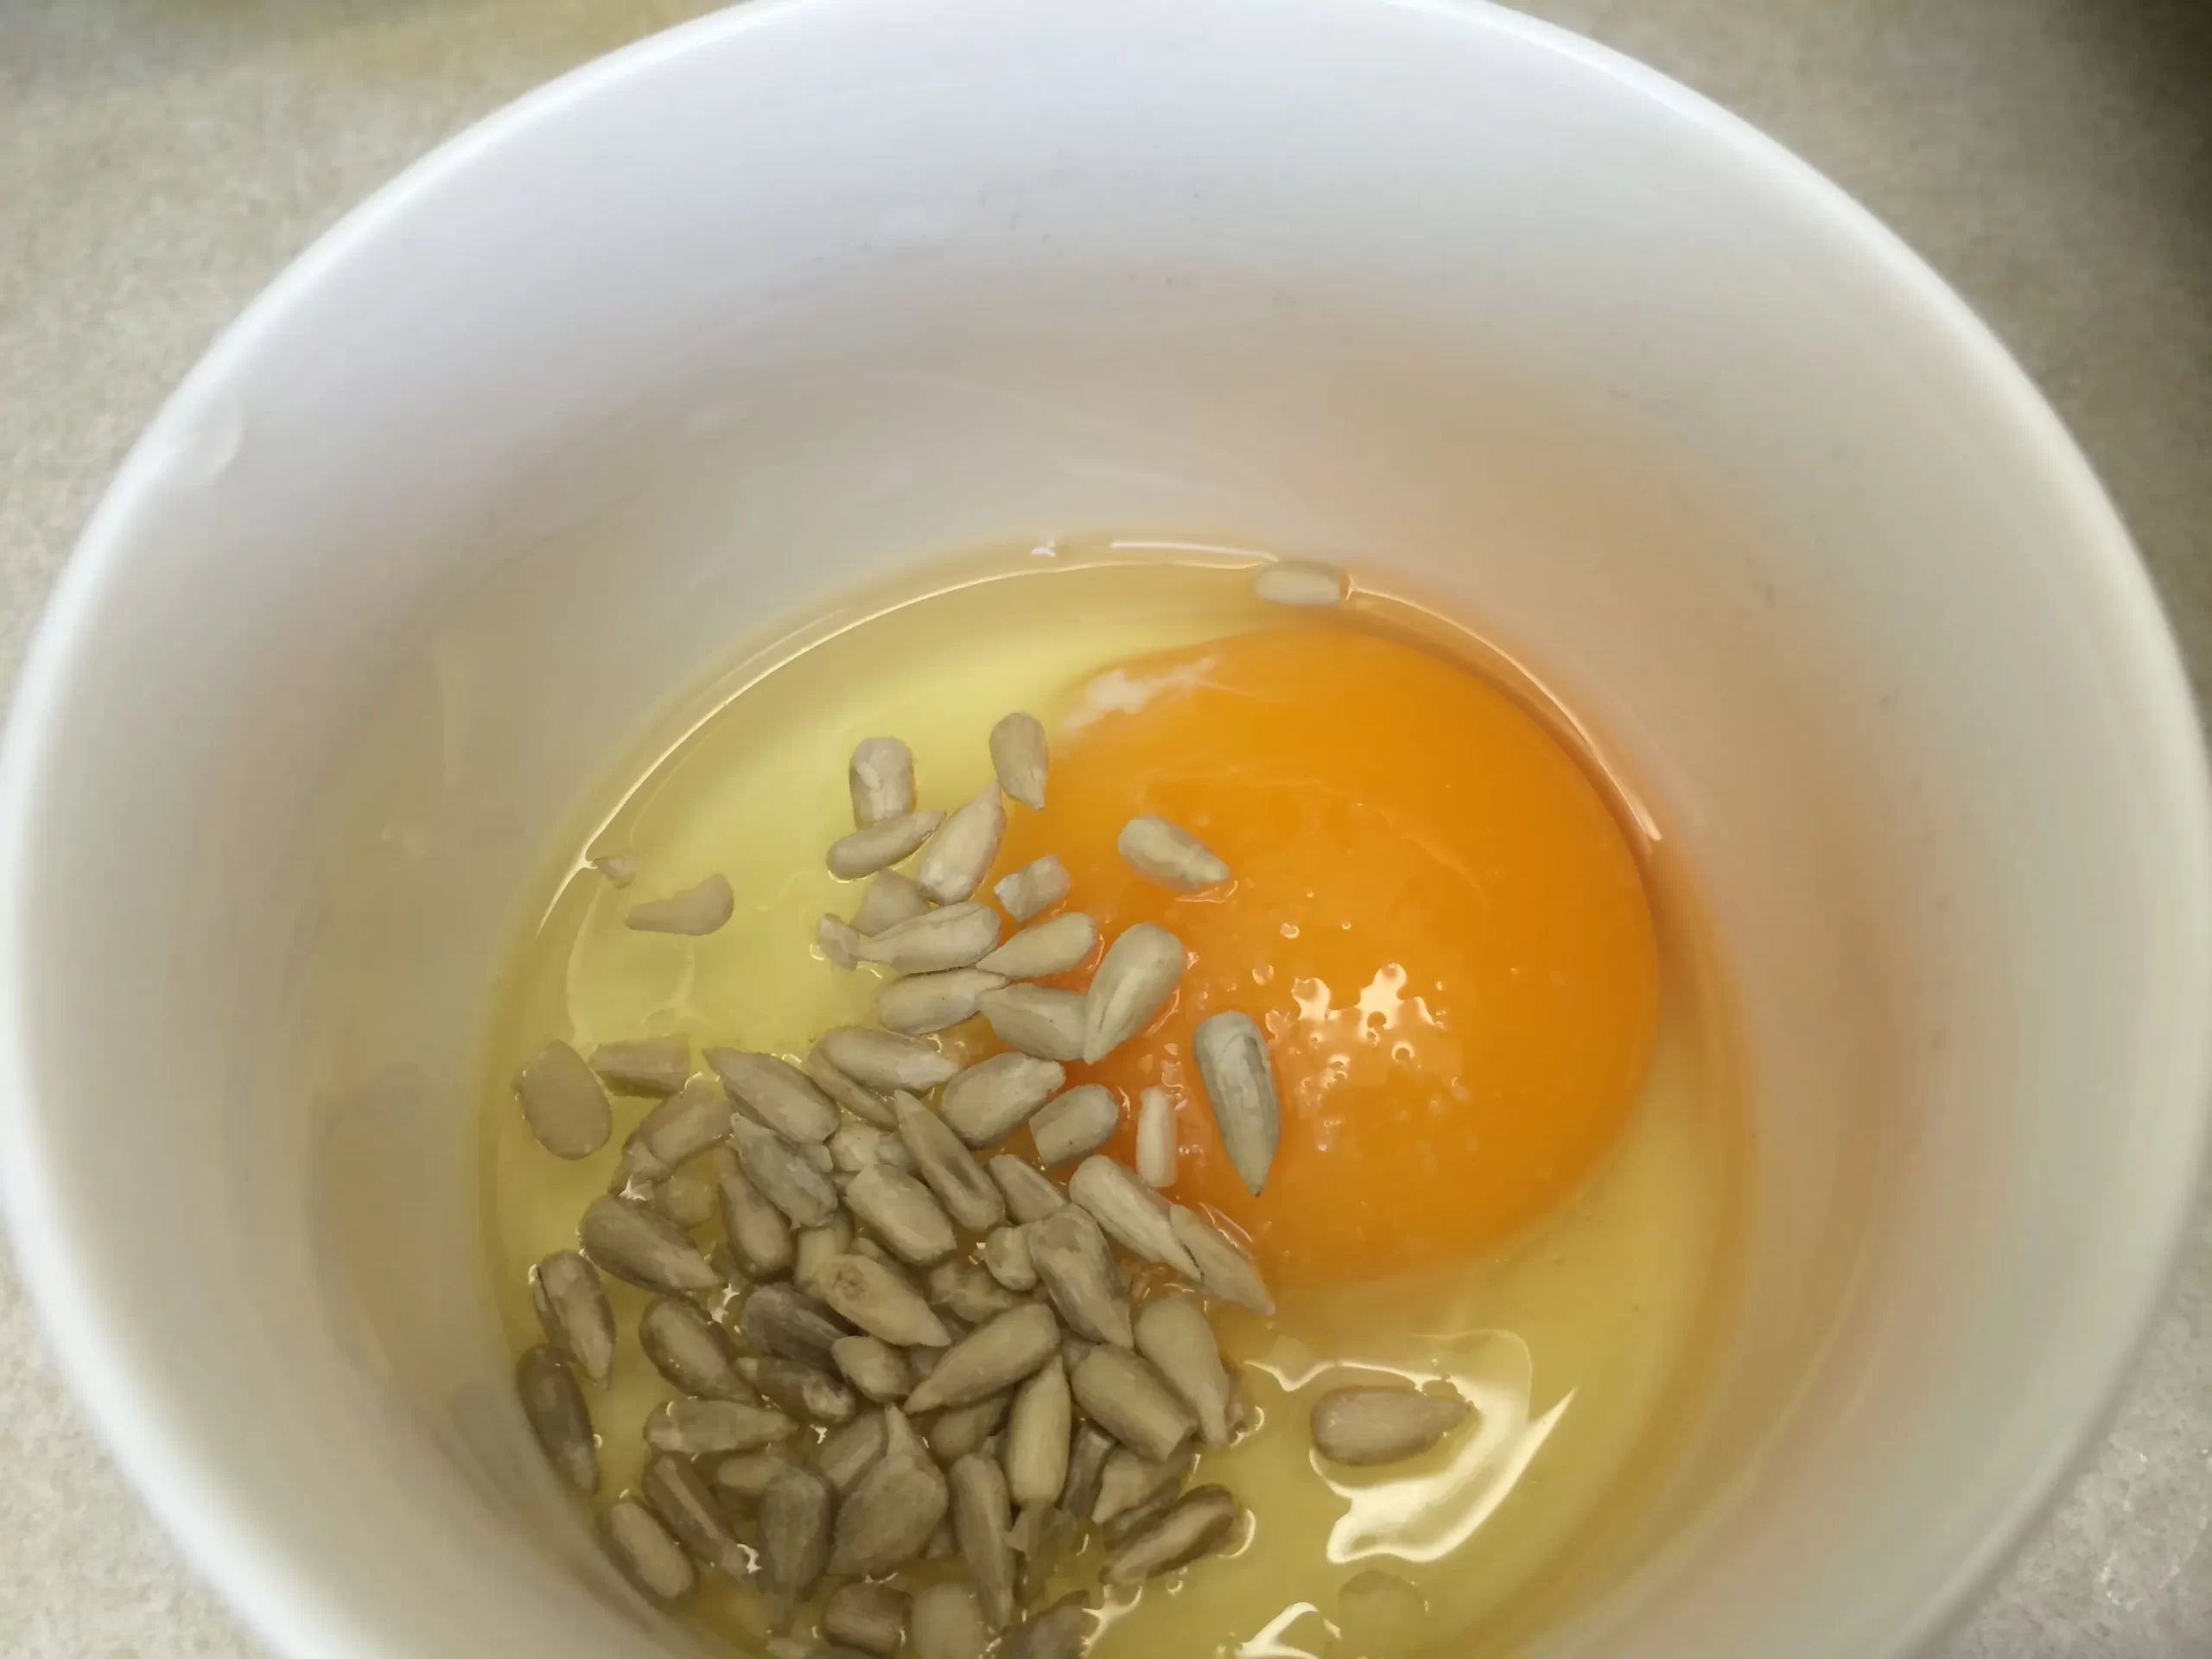 eggs and sunflower seeds